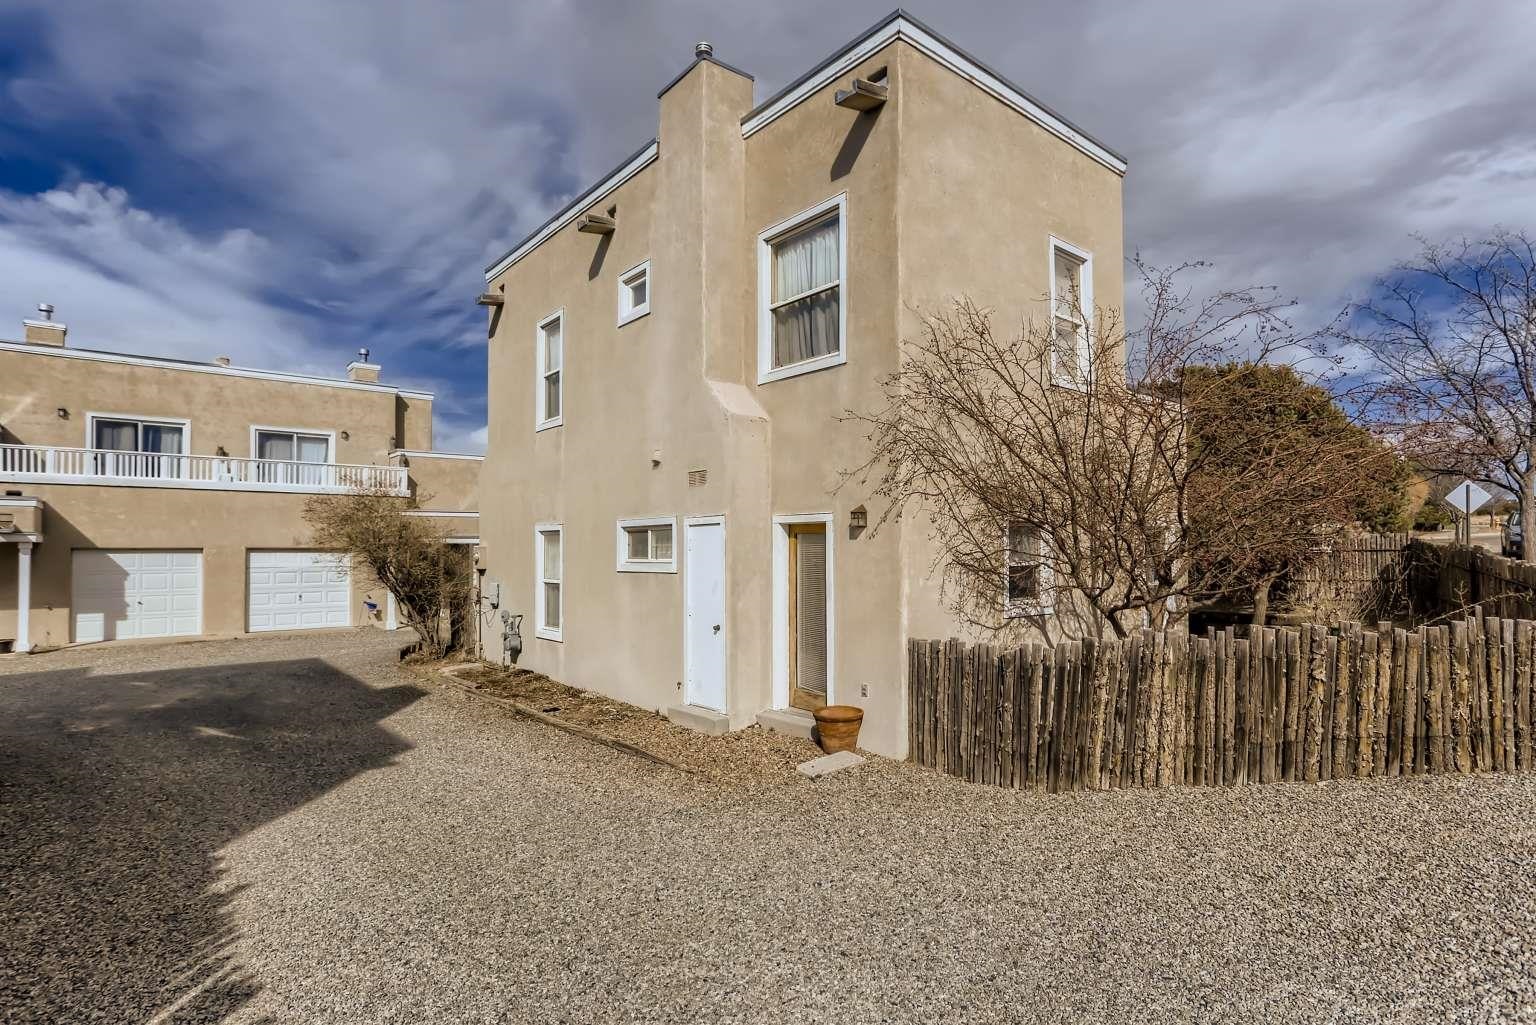 4129 WHISPERING WING, Santa Fe, New Mexico 87507, 3 Bedrooms Bedrooms, ,2 BathroomsBathrooms,Residential,For Sale,4129 WHISPERING WING,202201231